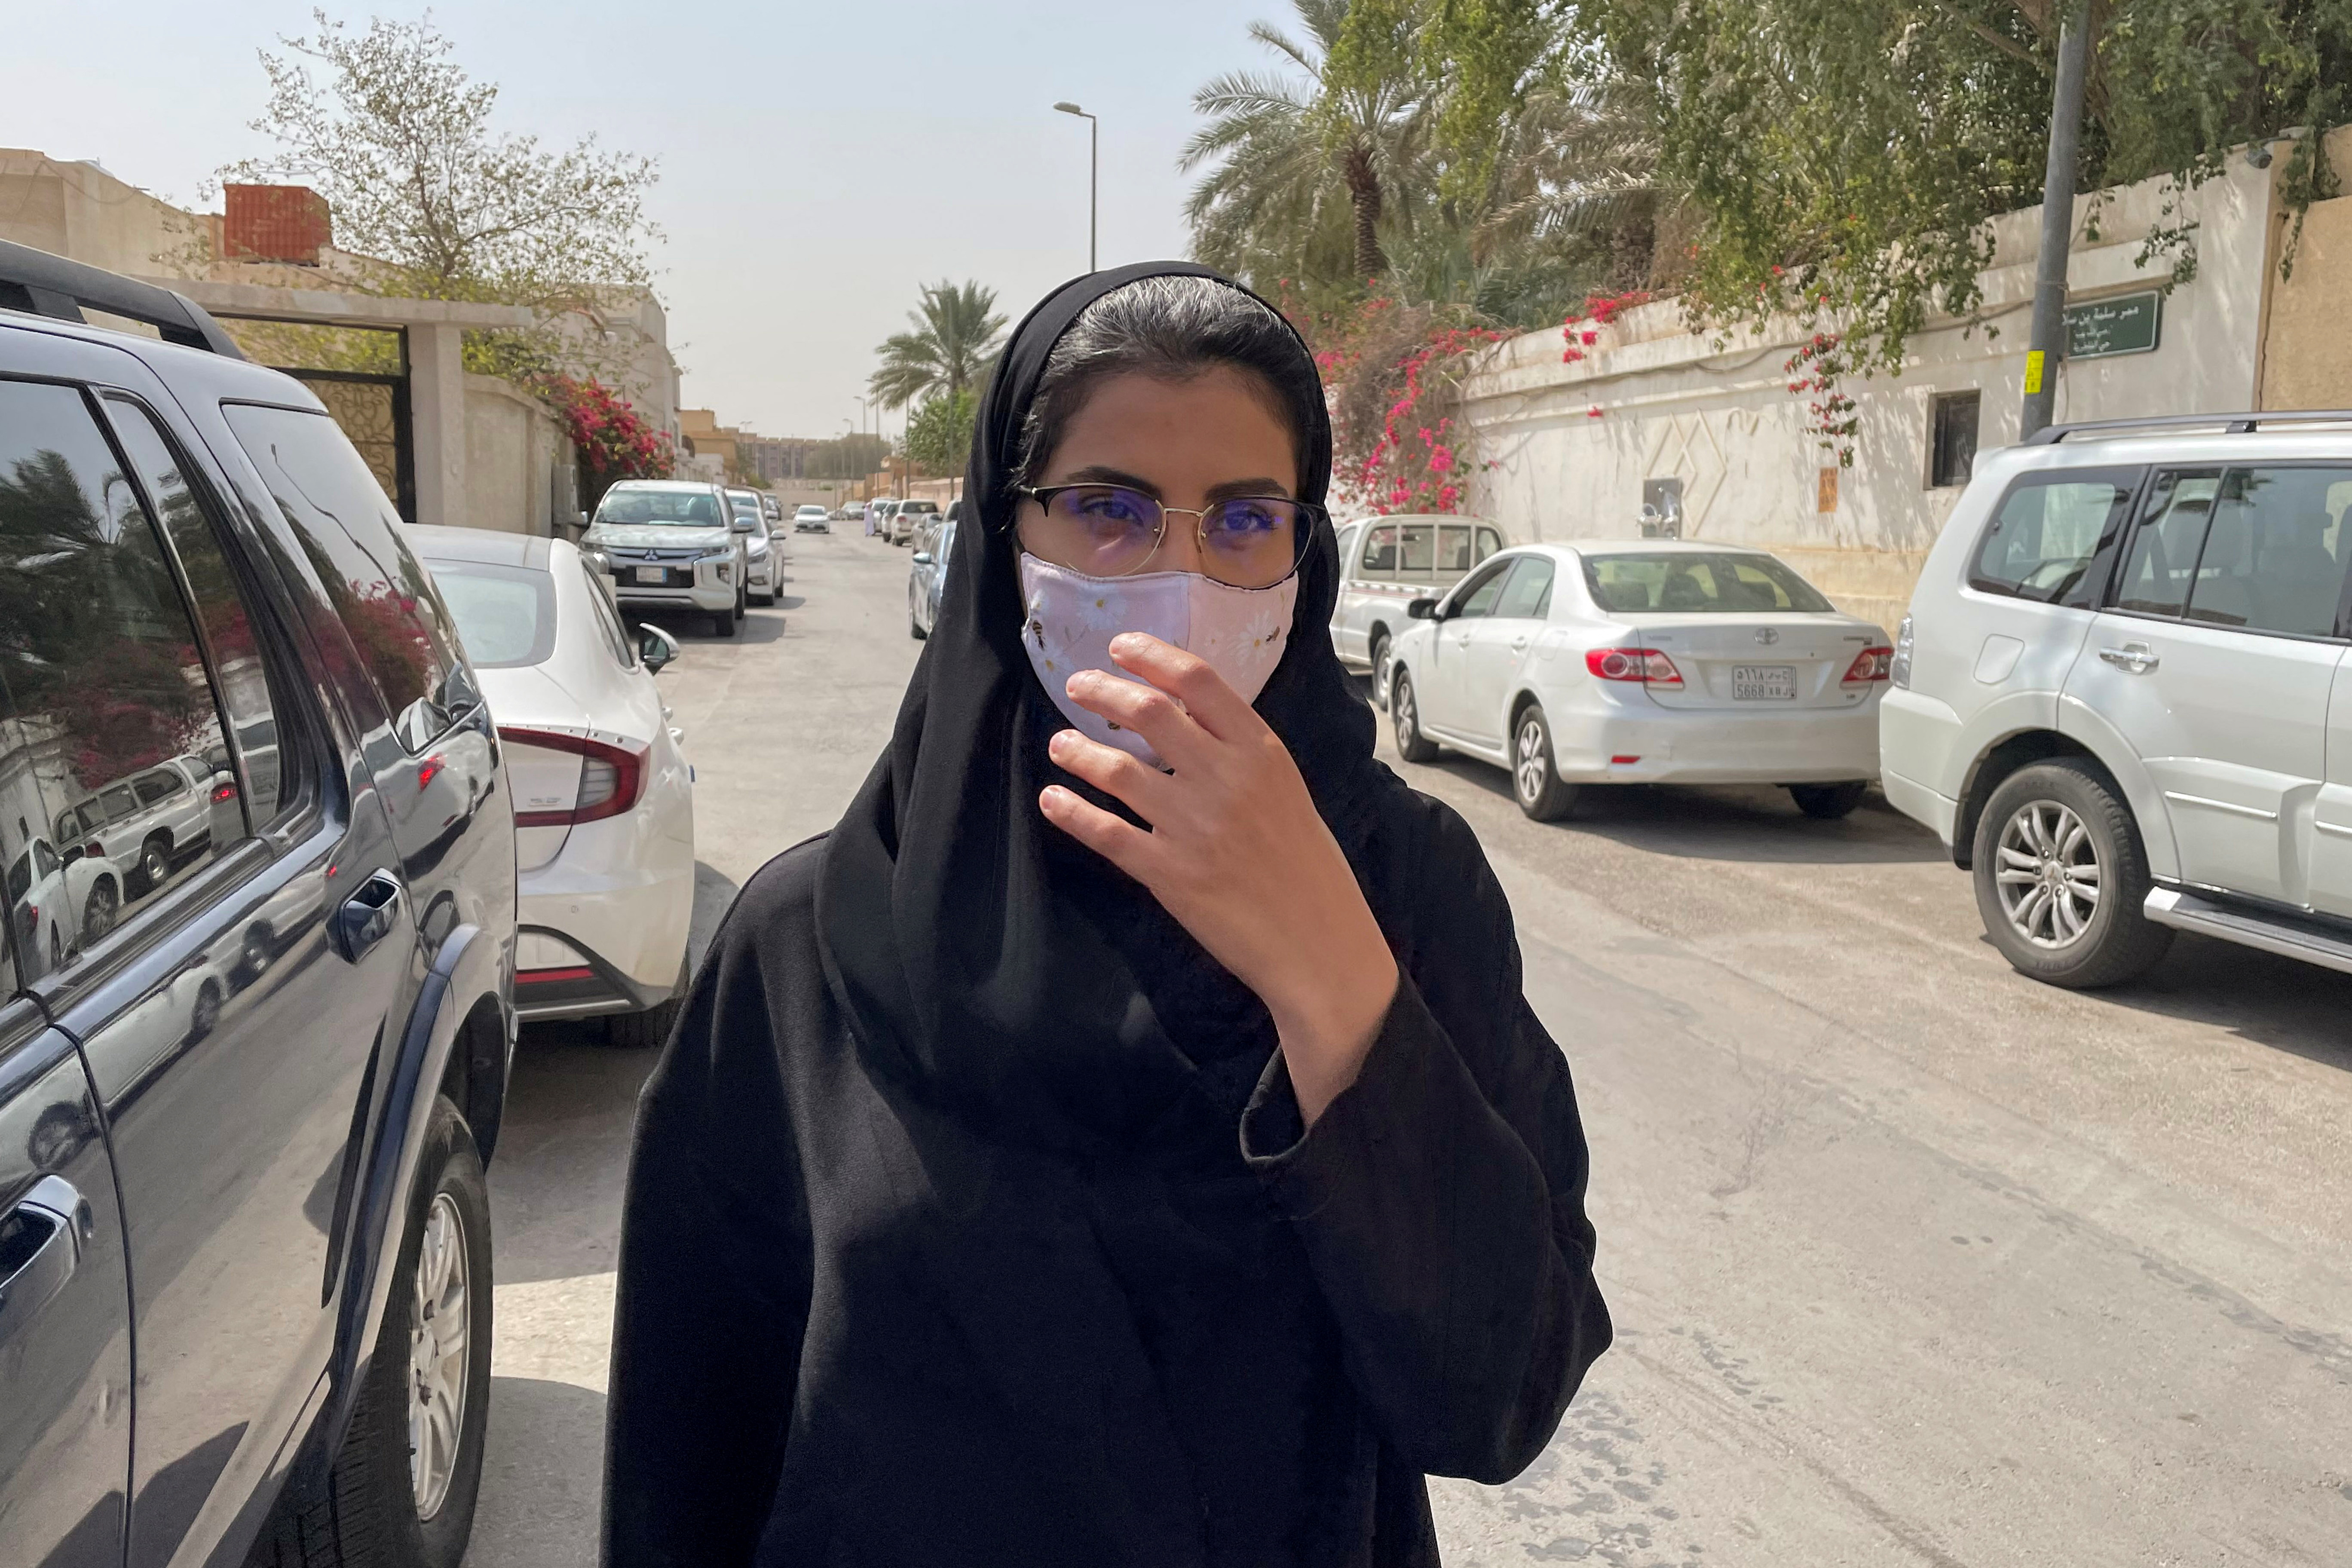 Saudi activist Loujain Al-Hathloul makes her way to appear at a special criminal court for an appeals hearing, in Riyadh